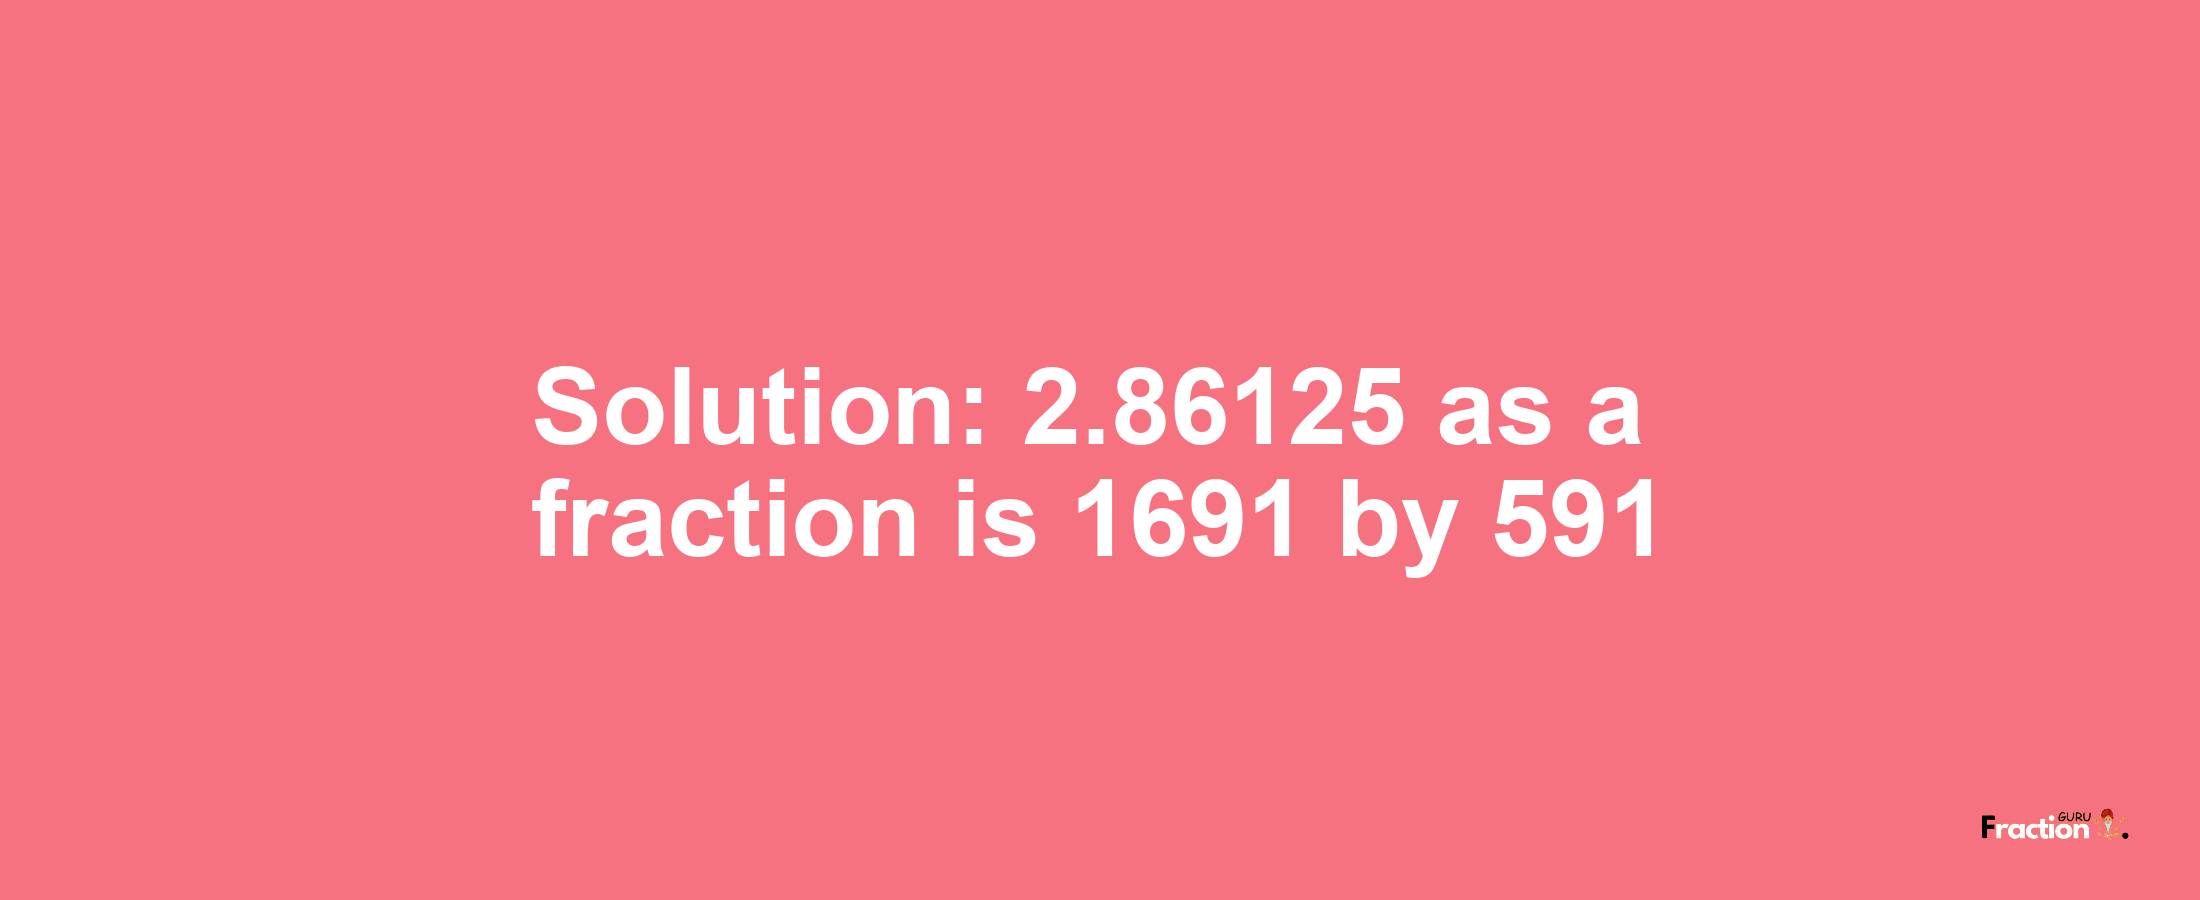 Solution:2.86125 as a fraction is 1691/591